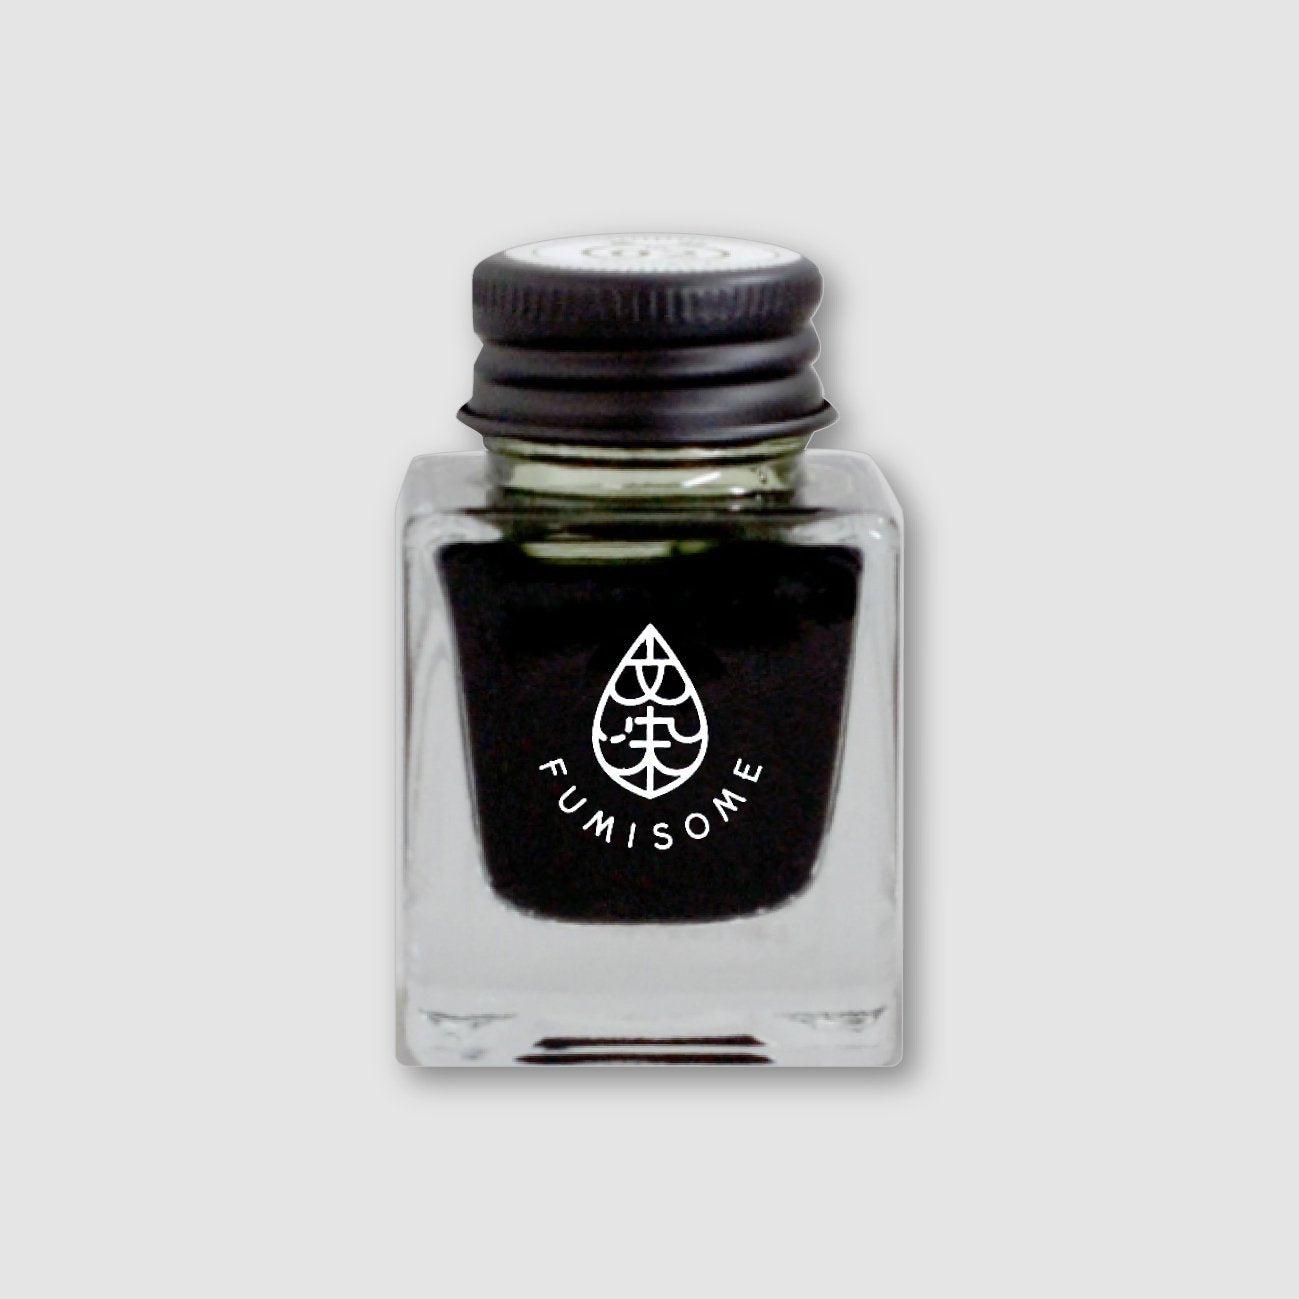 Tag Stationery Fumisome Natural Dye Ink Chlorophyll - Laywine's